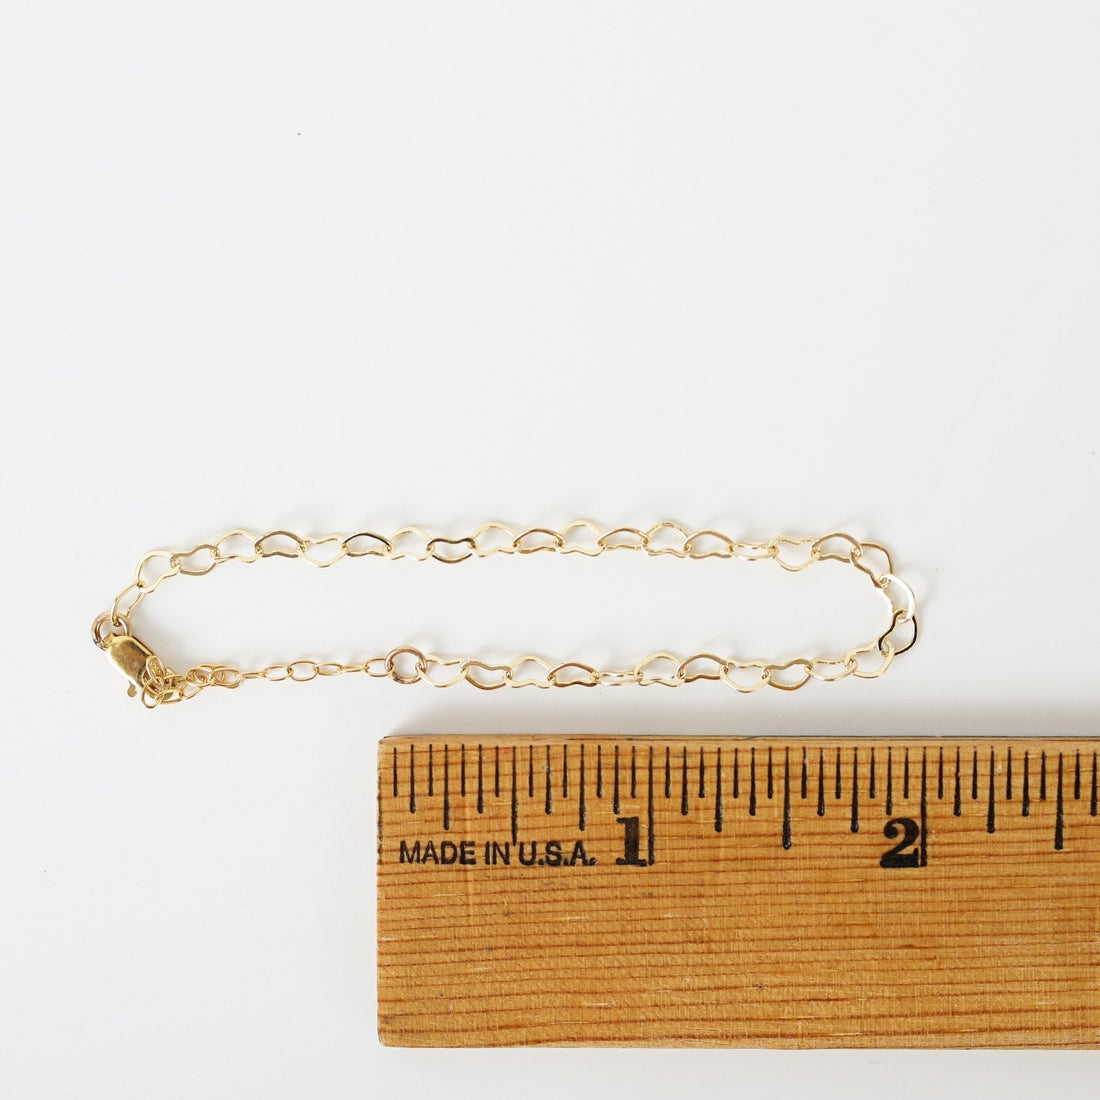 Delicate Heart Chain Bracelet - Chocolate and Steel